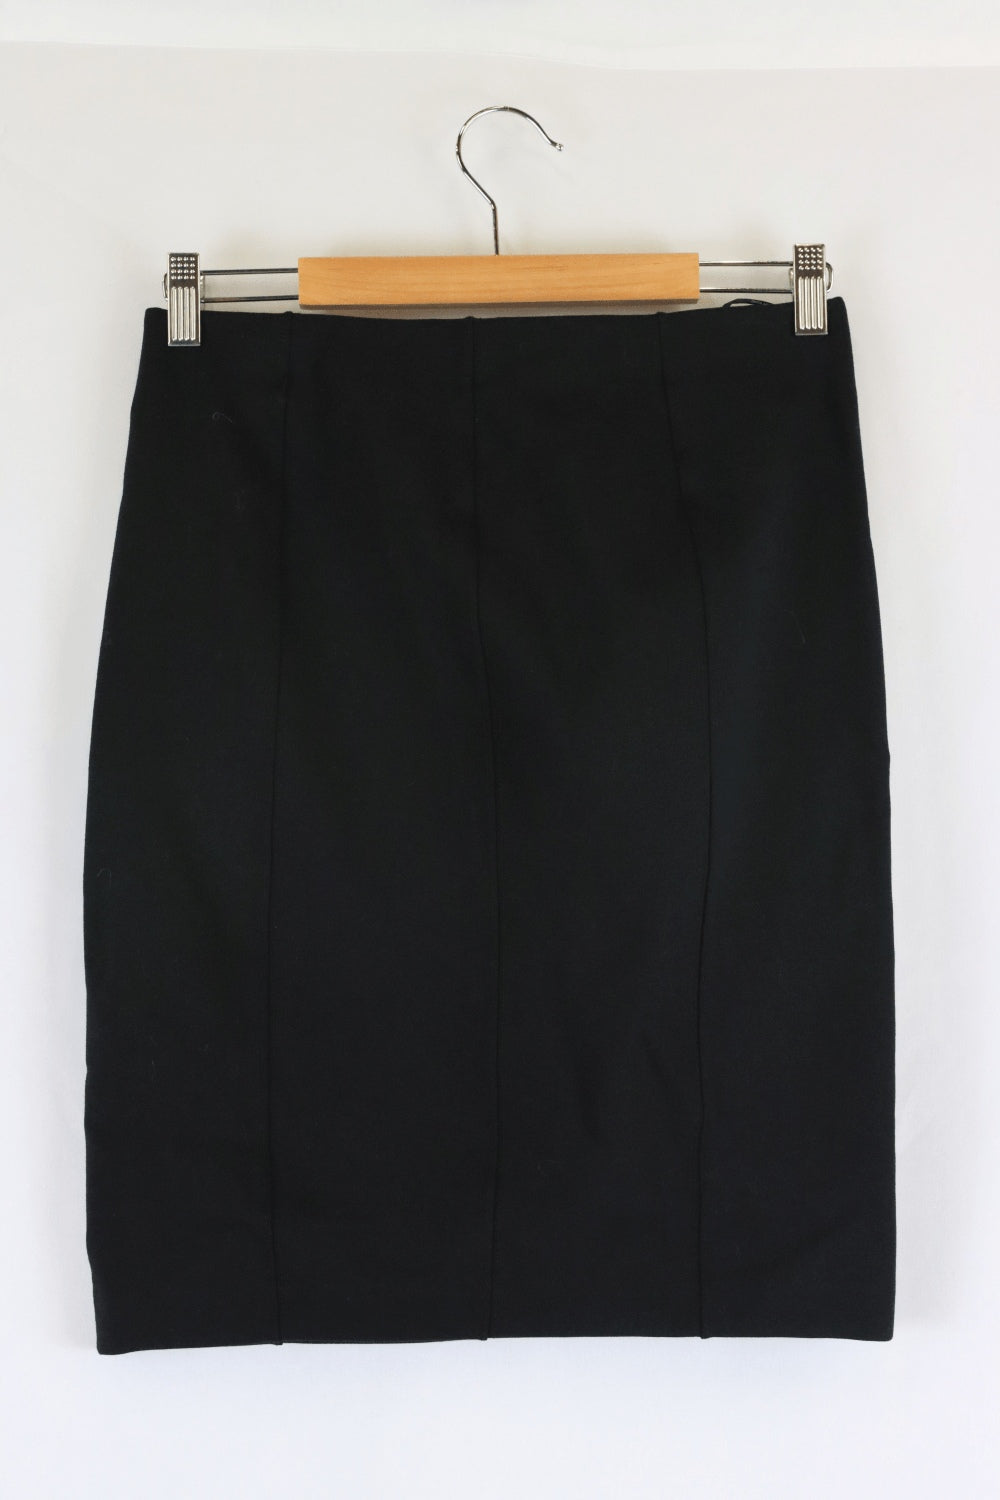 Country Road Skirt S